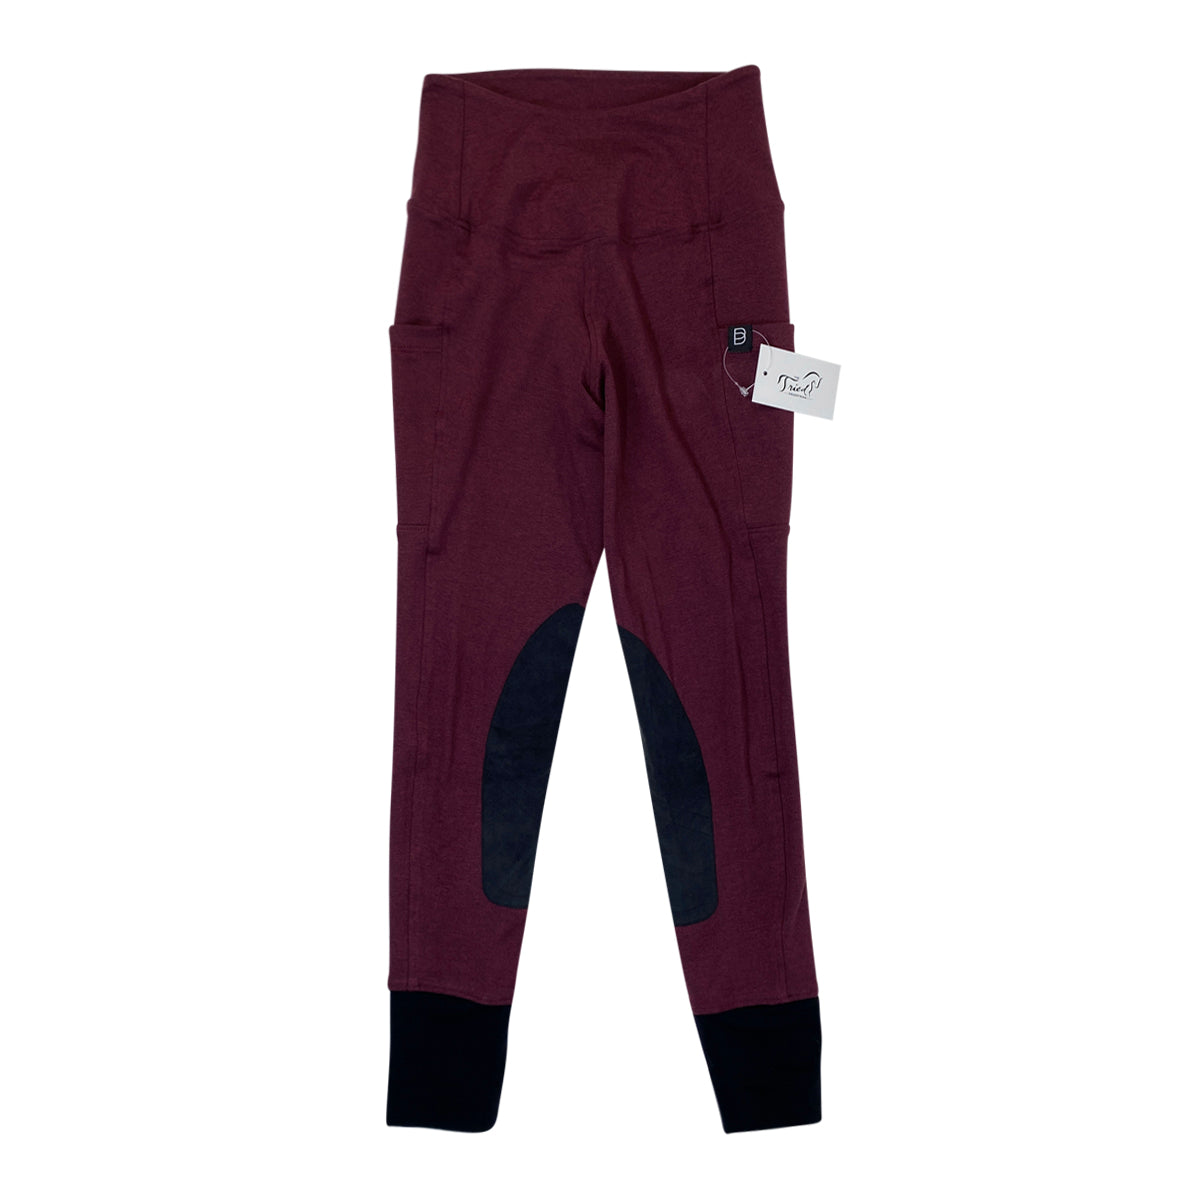 Botori 'Active Riding' Tights in Wine